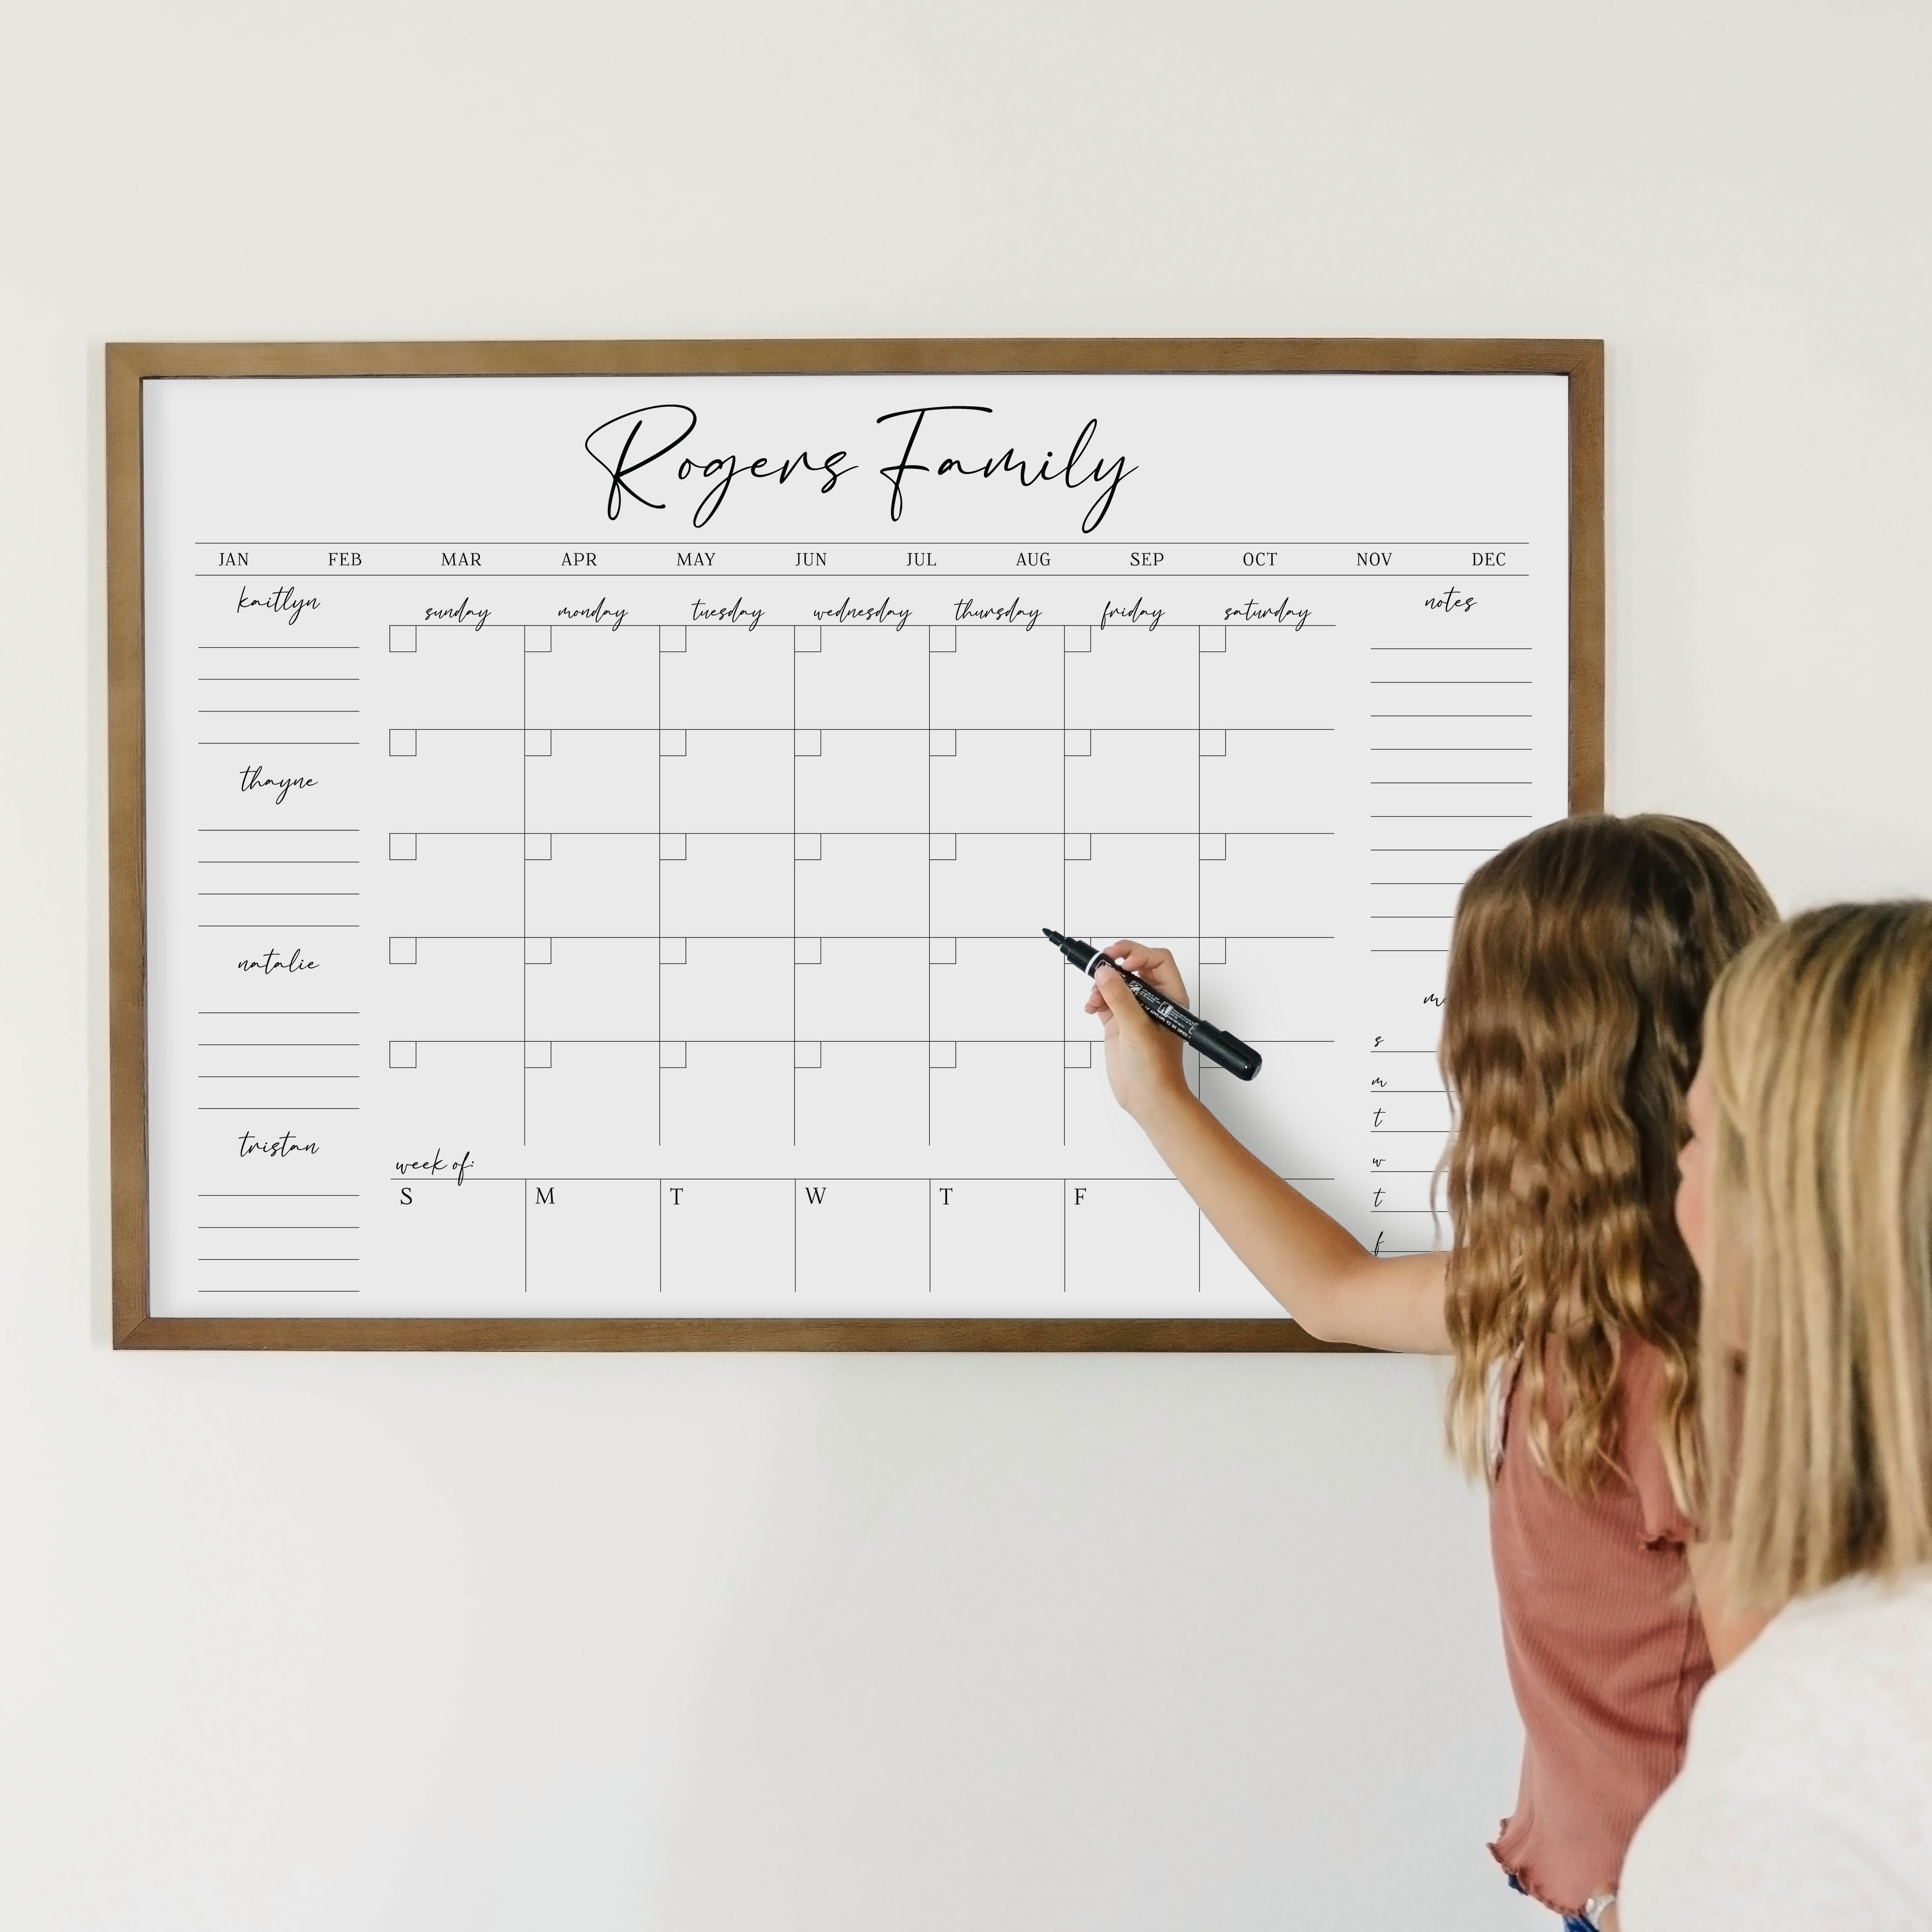 A framed whiteboard calendar with a monthly and weekly format hanging on the wall